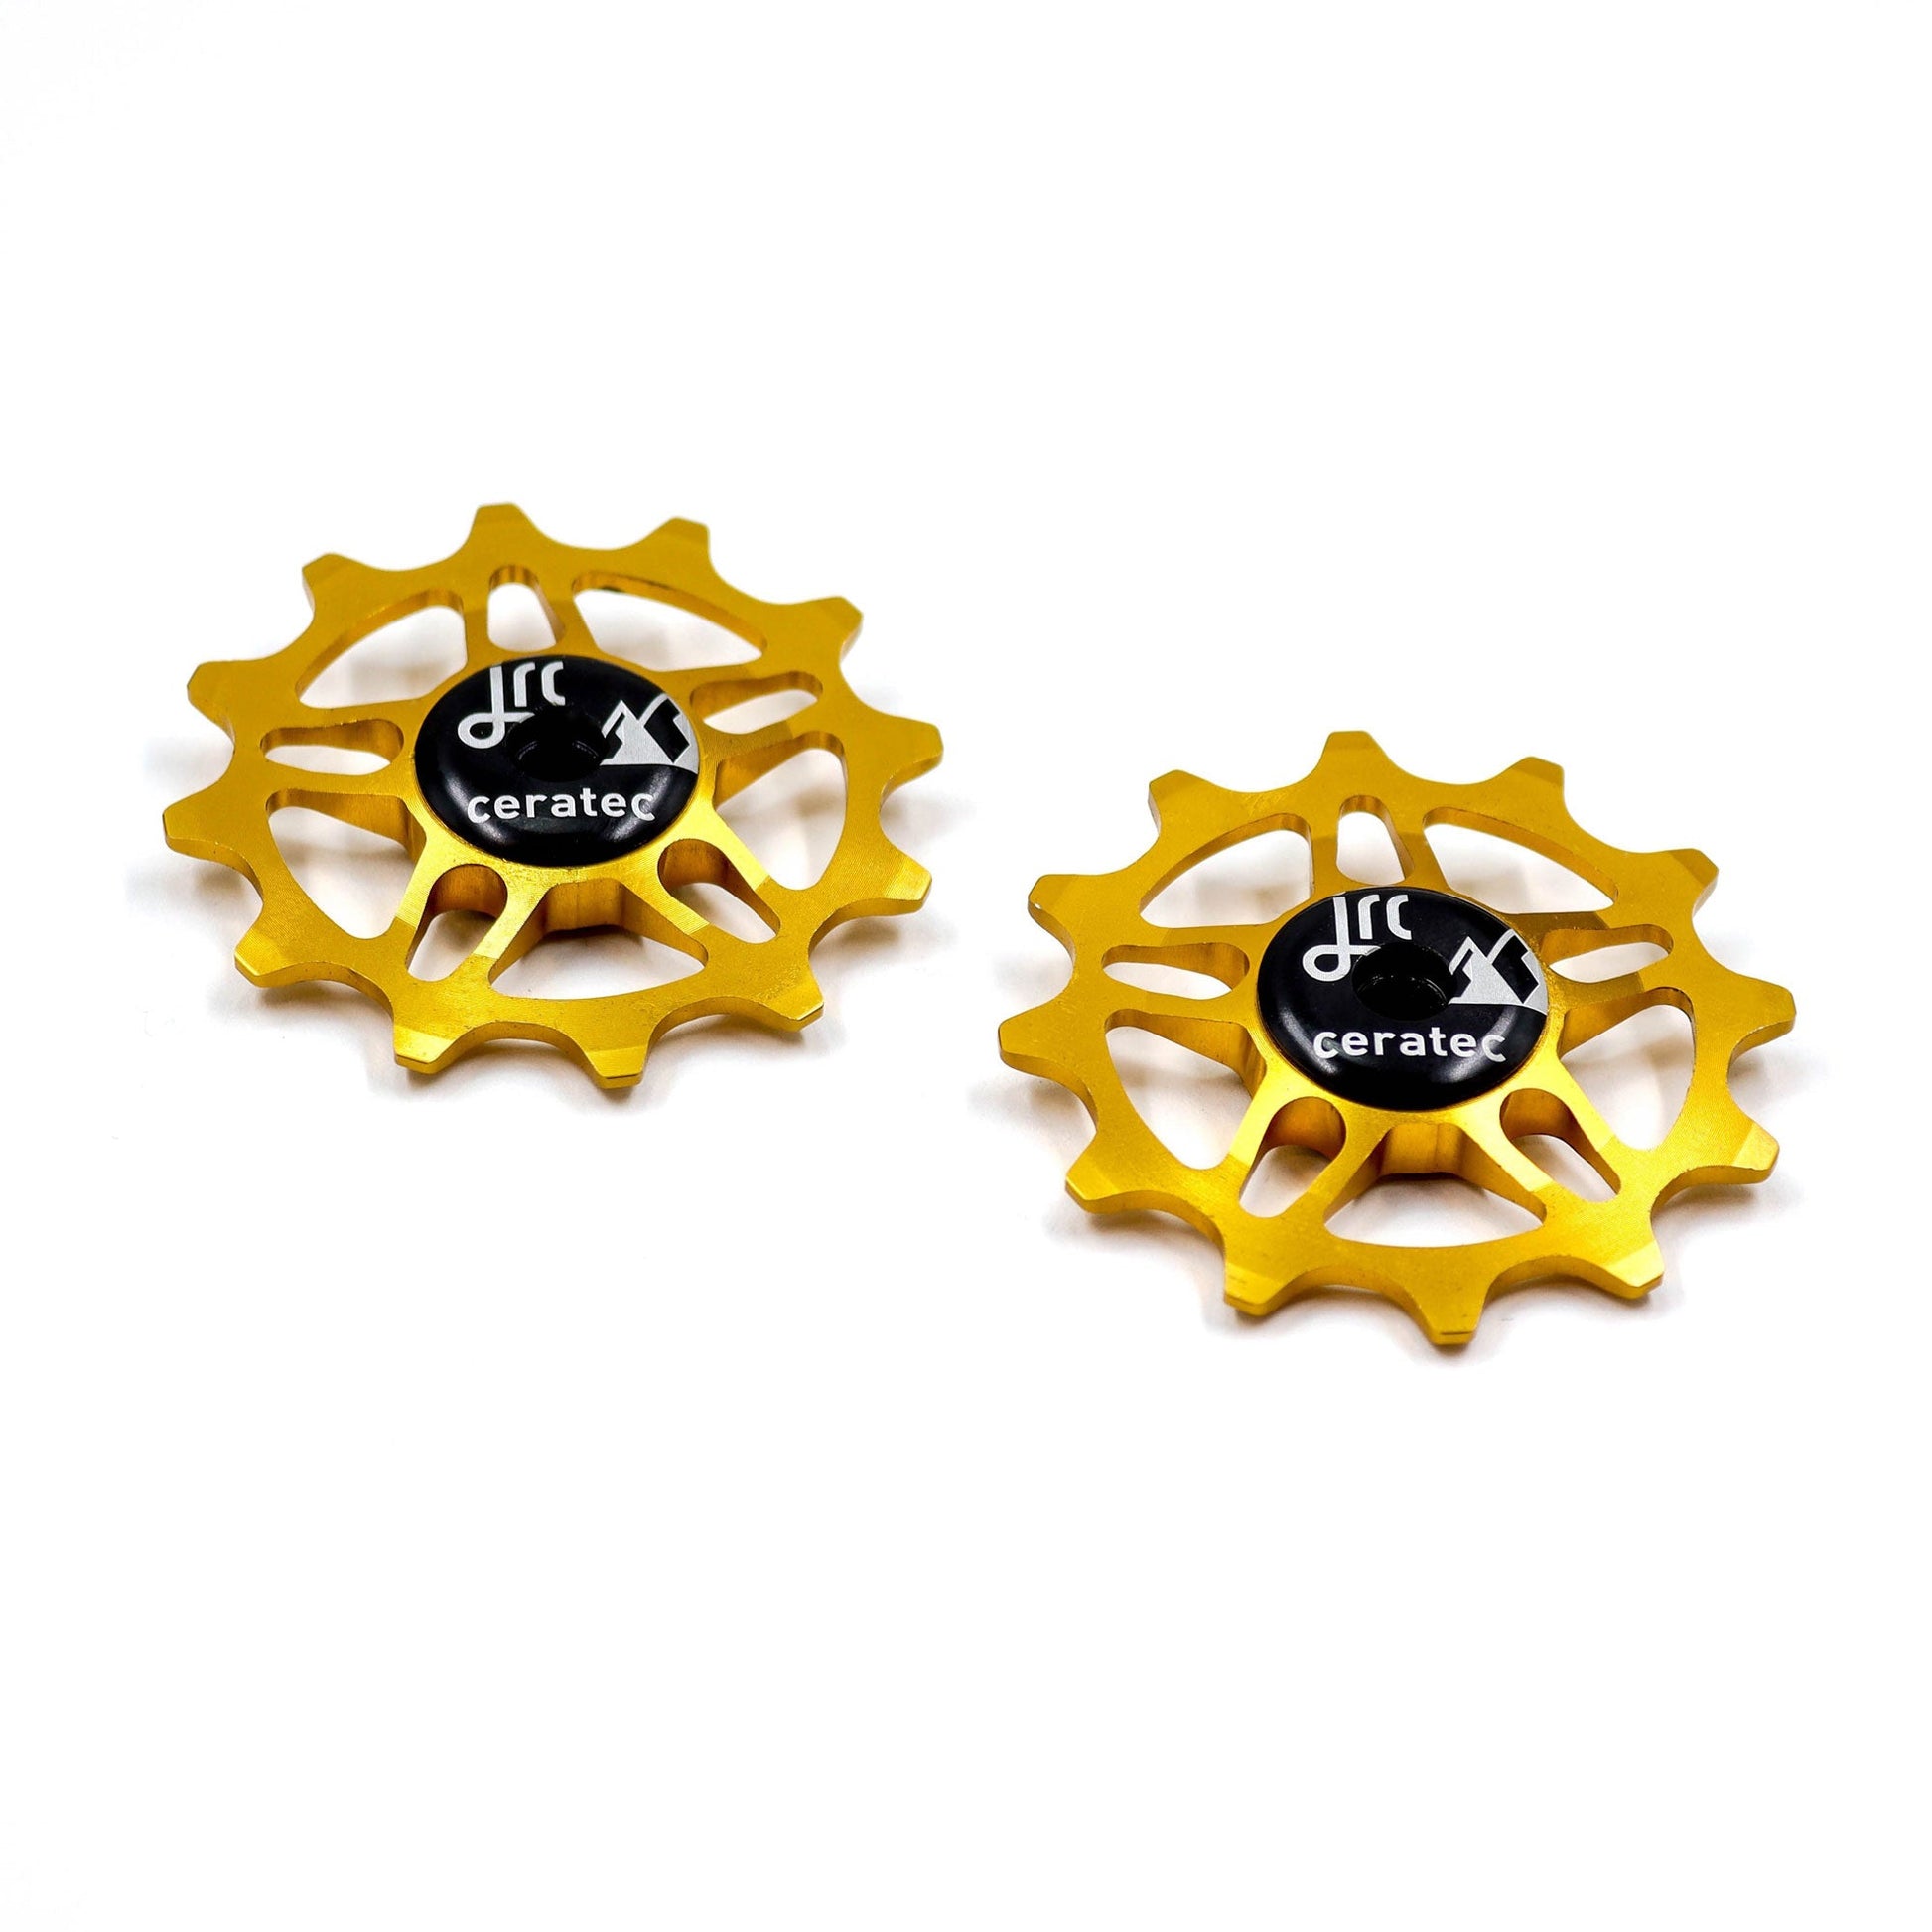 Gold, lightweight aluminium pulley wheel set for bicycles, compatible with 12 tooth SRAM Rival/ Force/ Red/ AXS